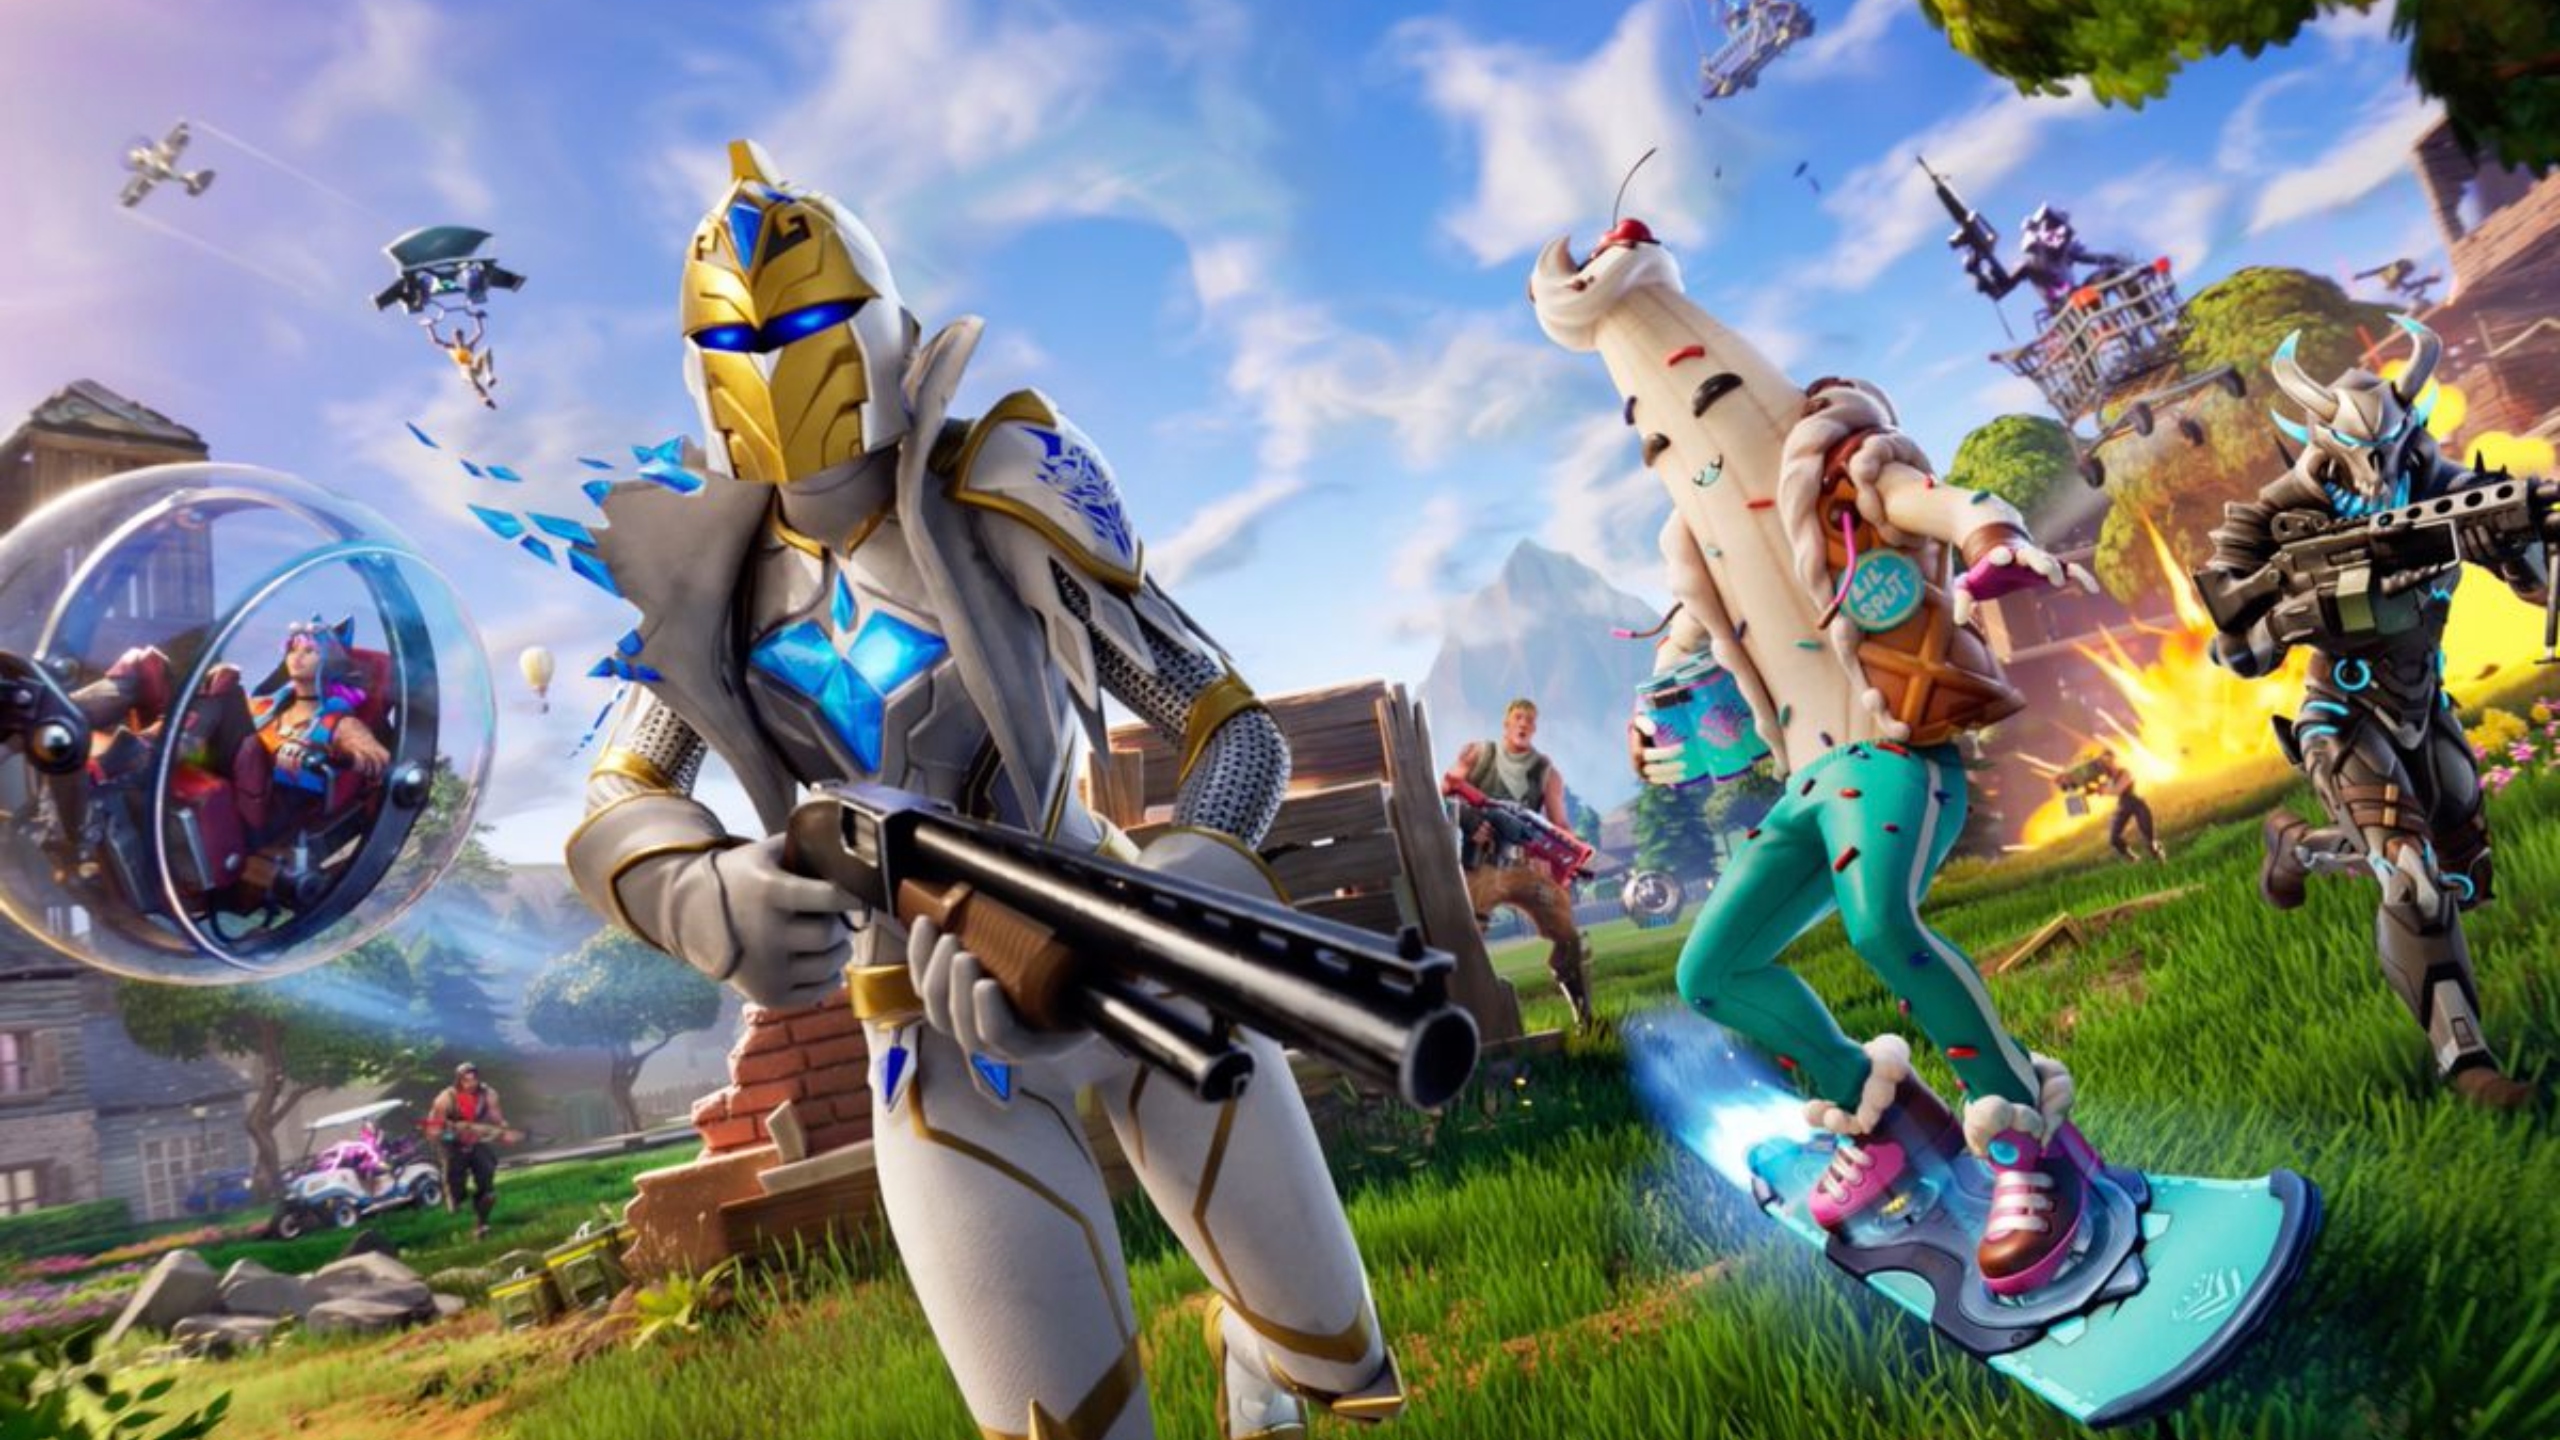 Victory royale: Epic Games wins antitrust battle with Google over